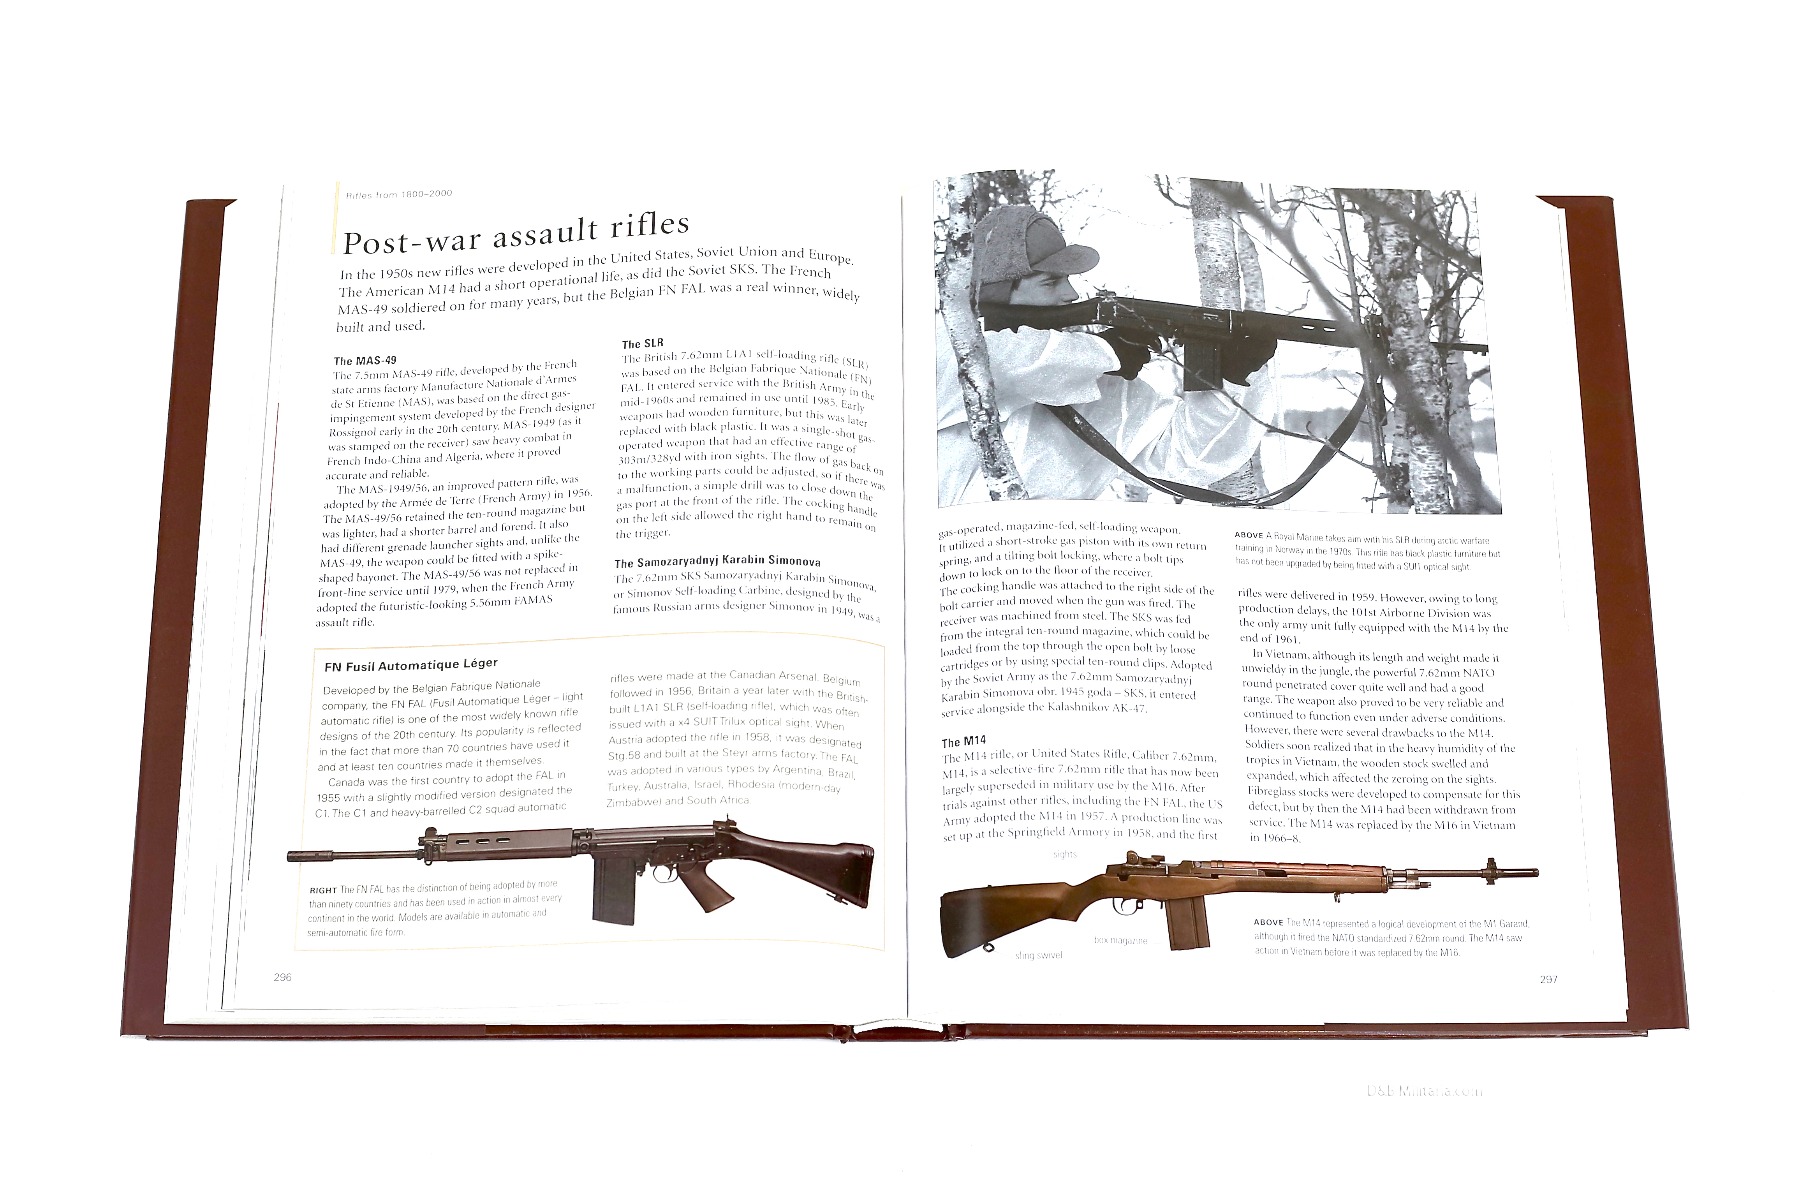 the illustrated world encyclopedia of guns pdf free download